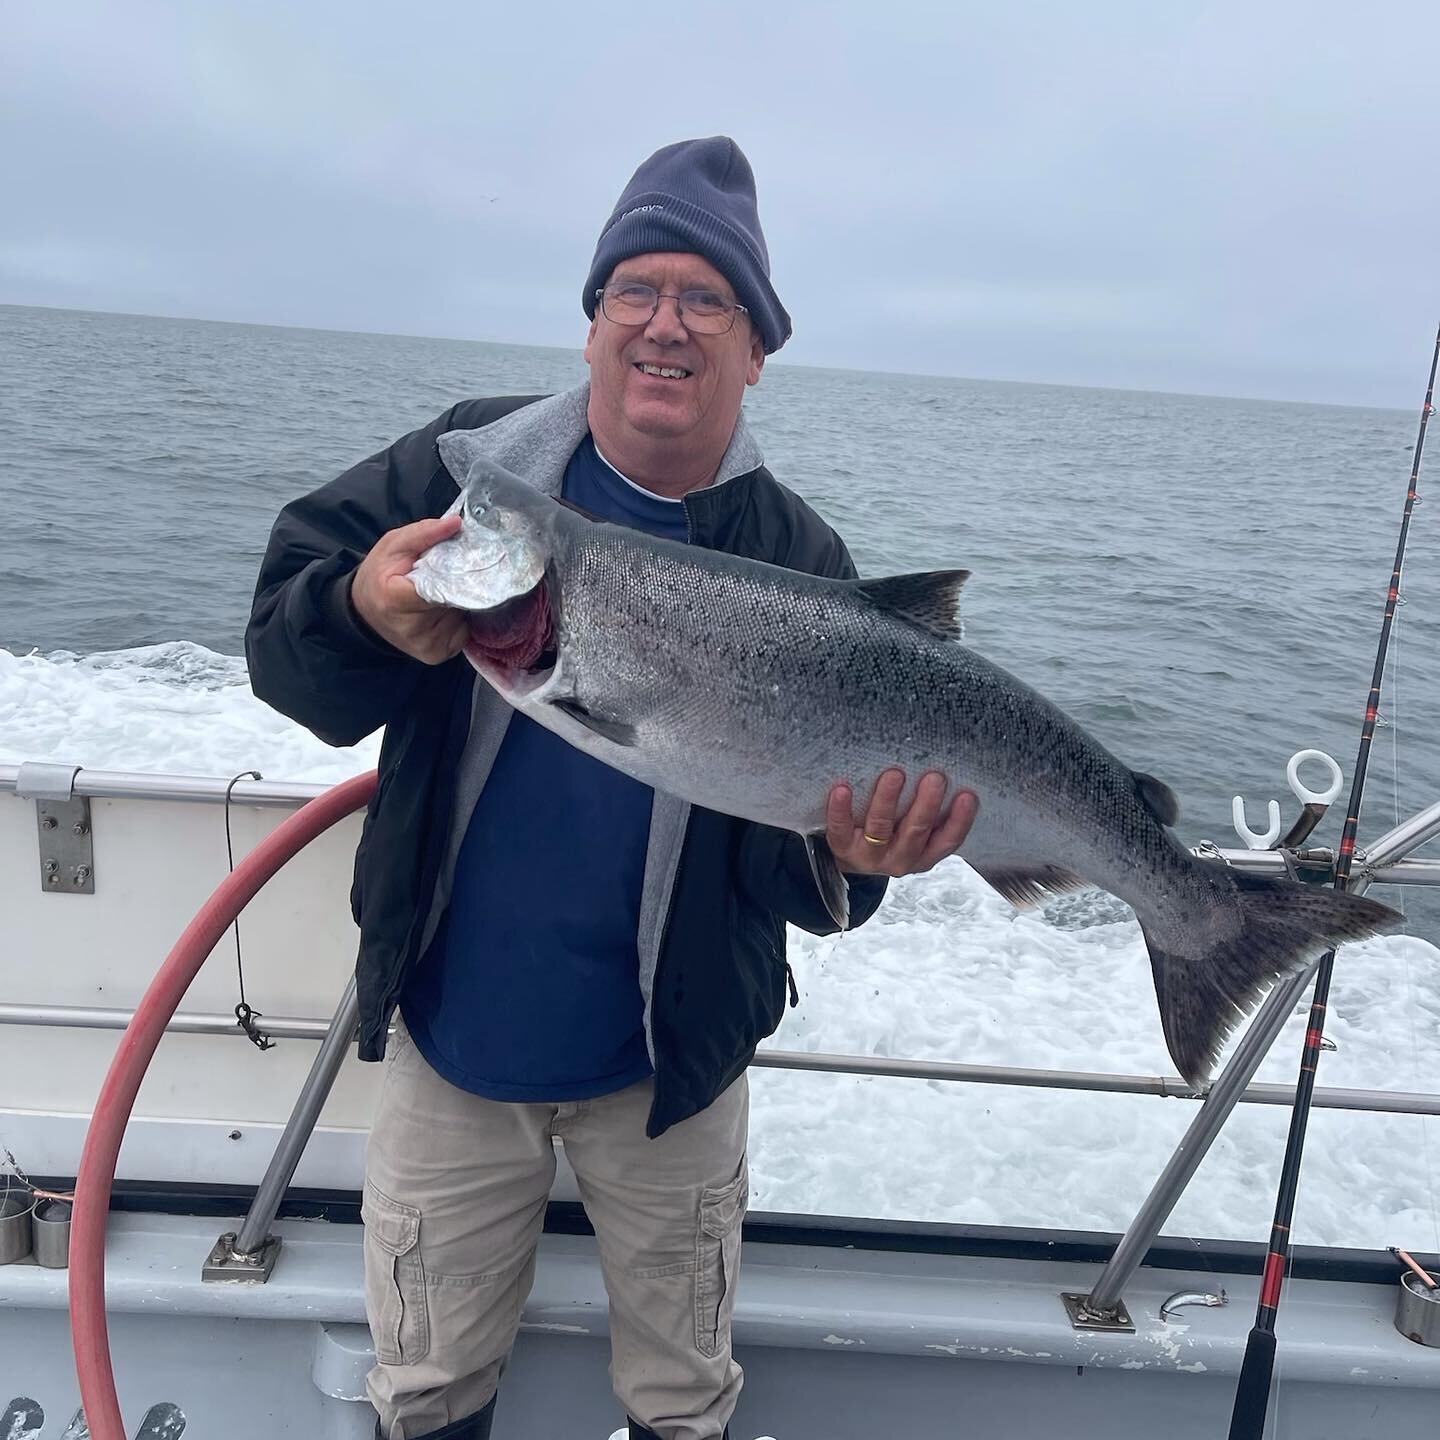 Hog alert! Major hog alert! 28 pounder and 31 pounder made the day a little bit brighter after a rough morning! #fishemeryville #pacificpearlcharters.com #salmon #sfbayareafishing #thisiswhy #pigs #checkyobait